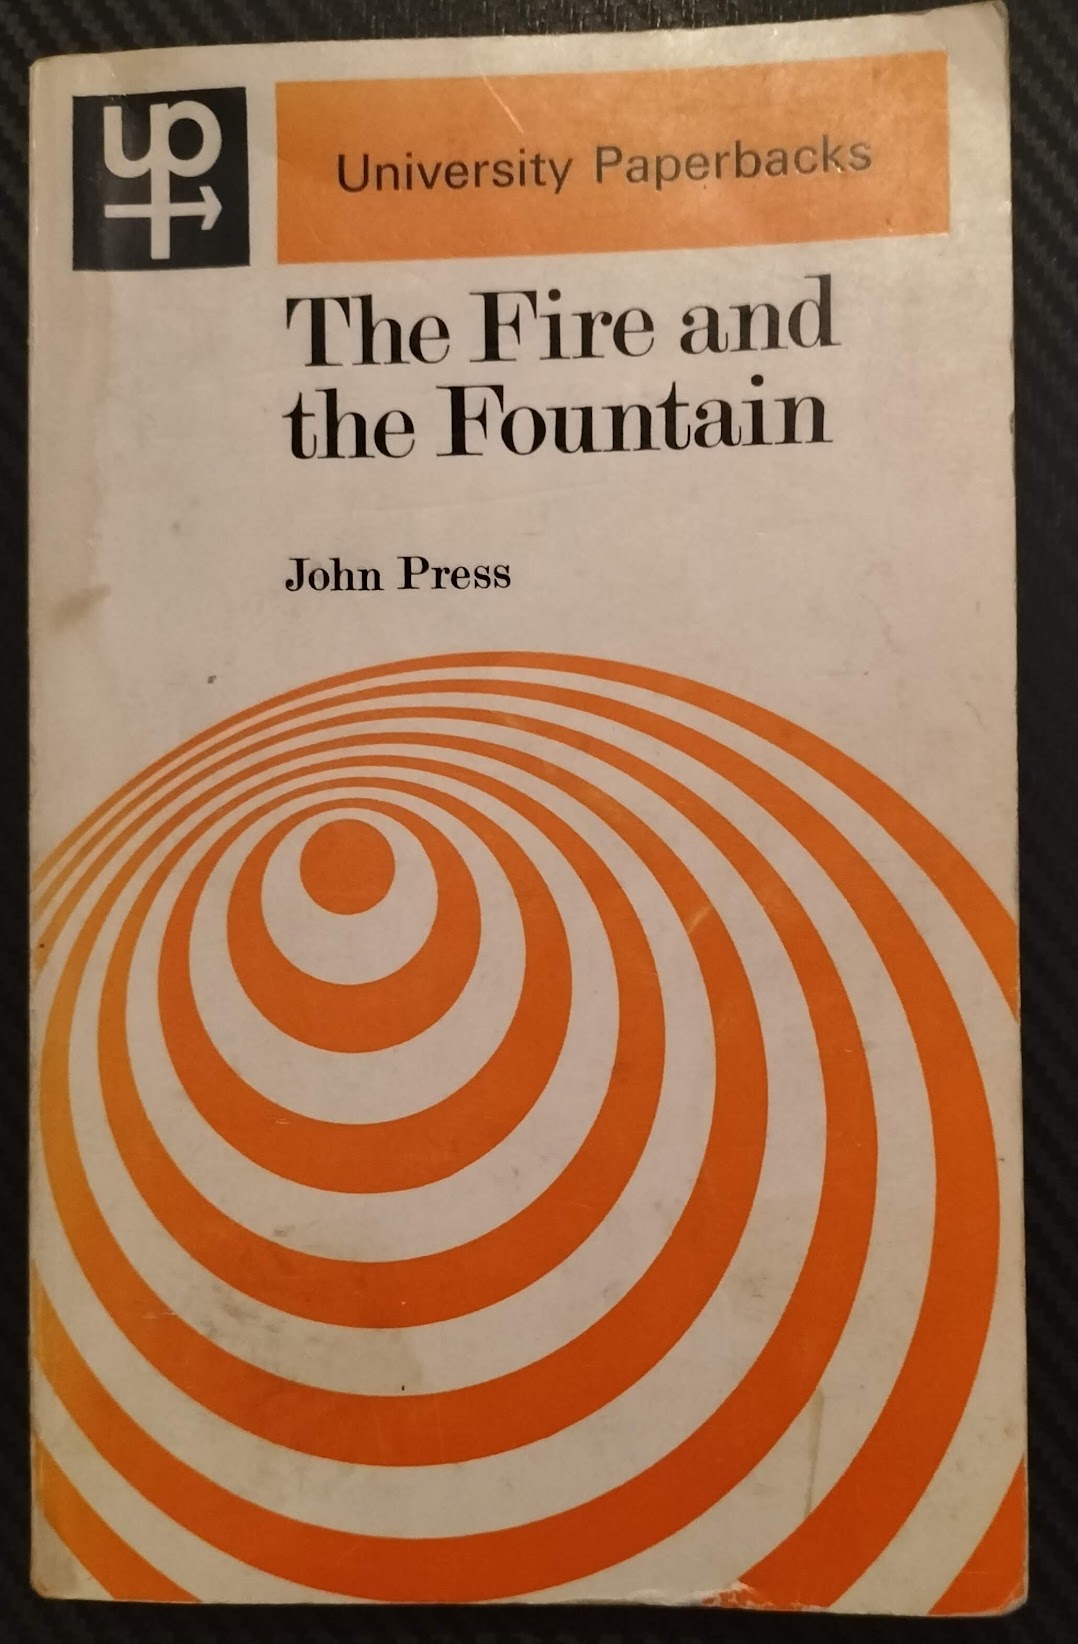 The Fire and the Fountain by John Press